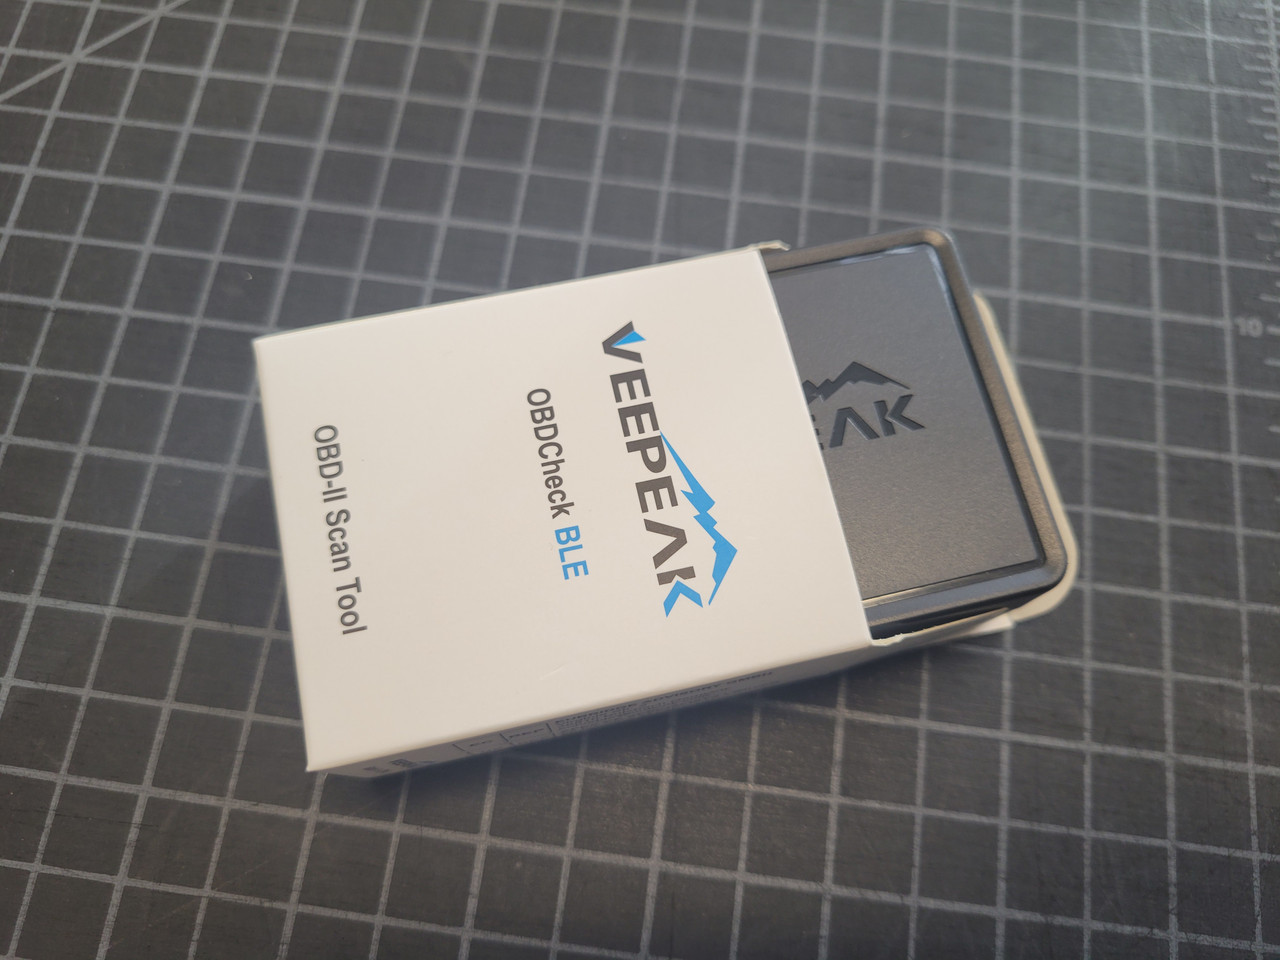 VeePeak Bluetooth OBDII Diagnostic Tool half out of the box